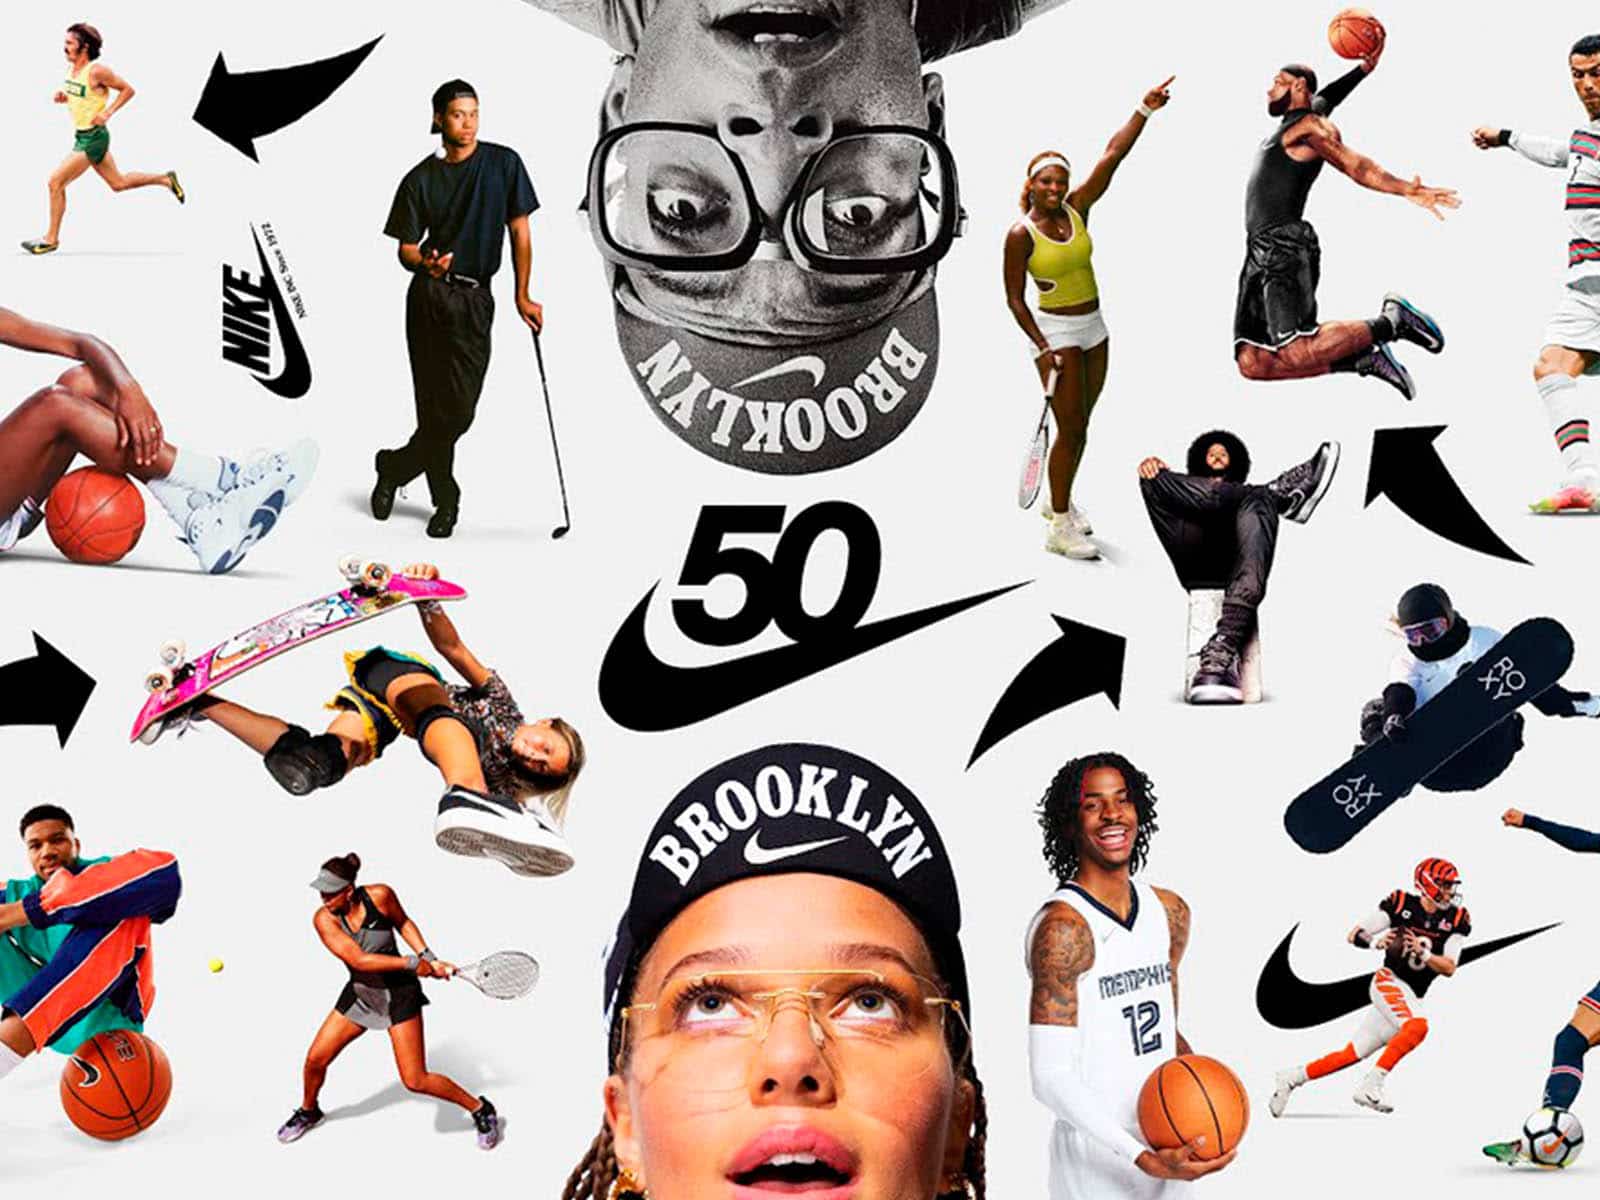 Nike celebrates its 50th anniversary with a workshop in Barna